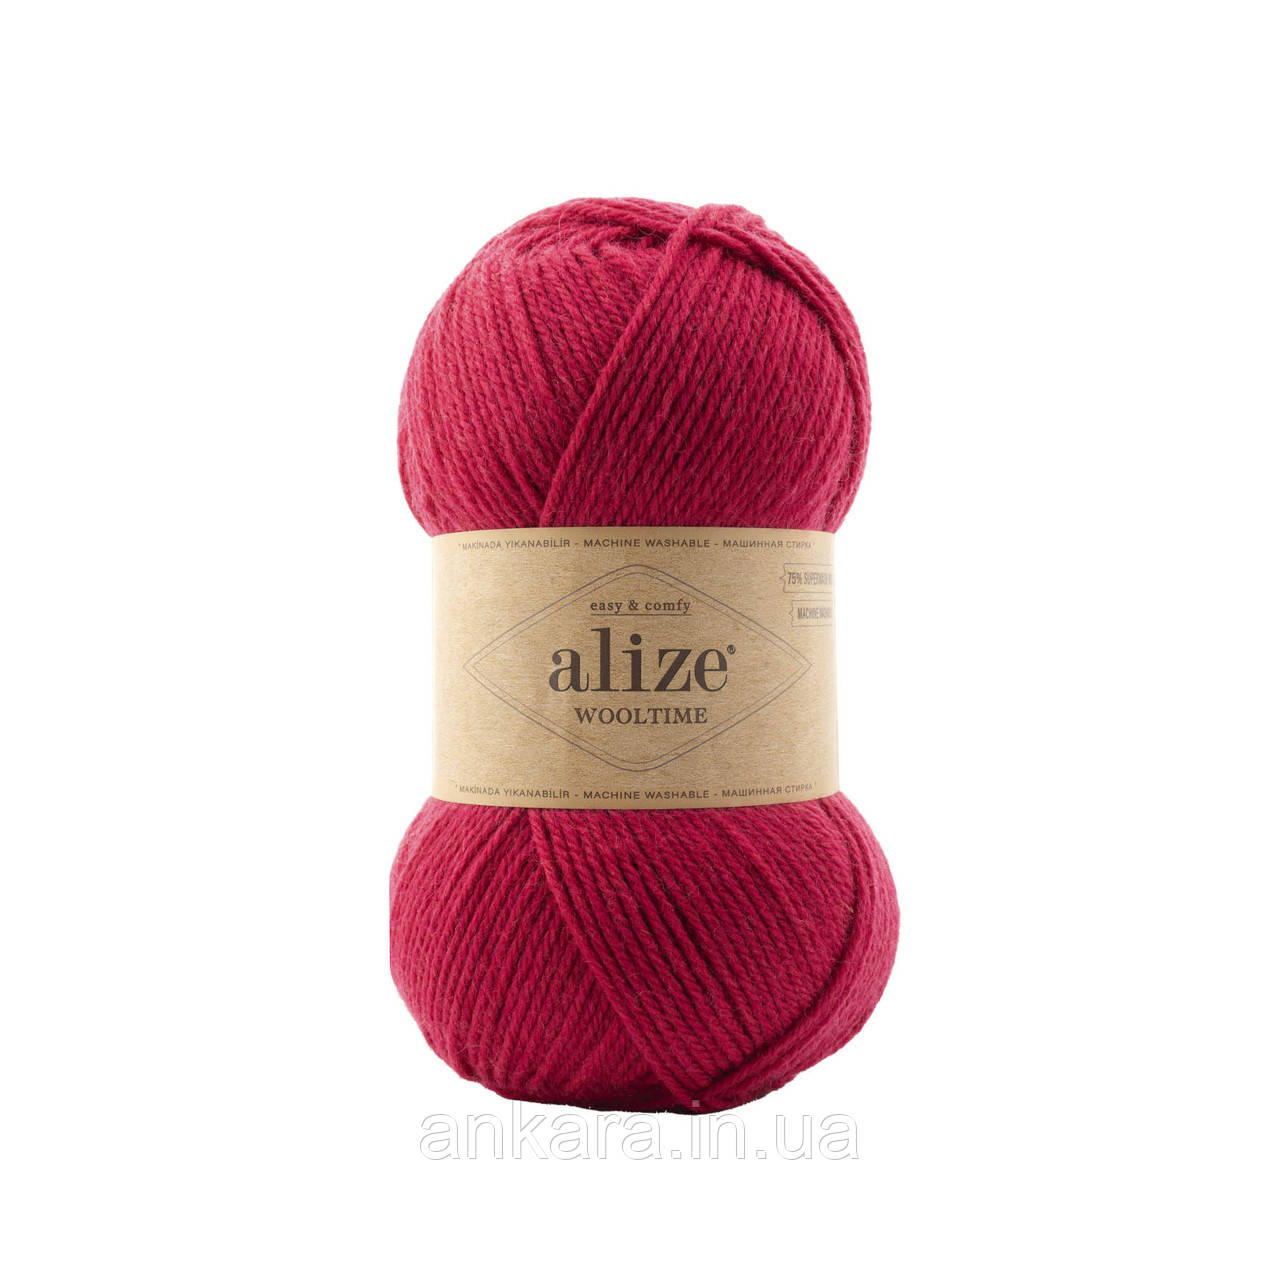 Alize Wooltime 740